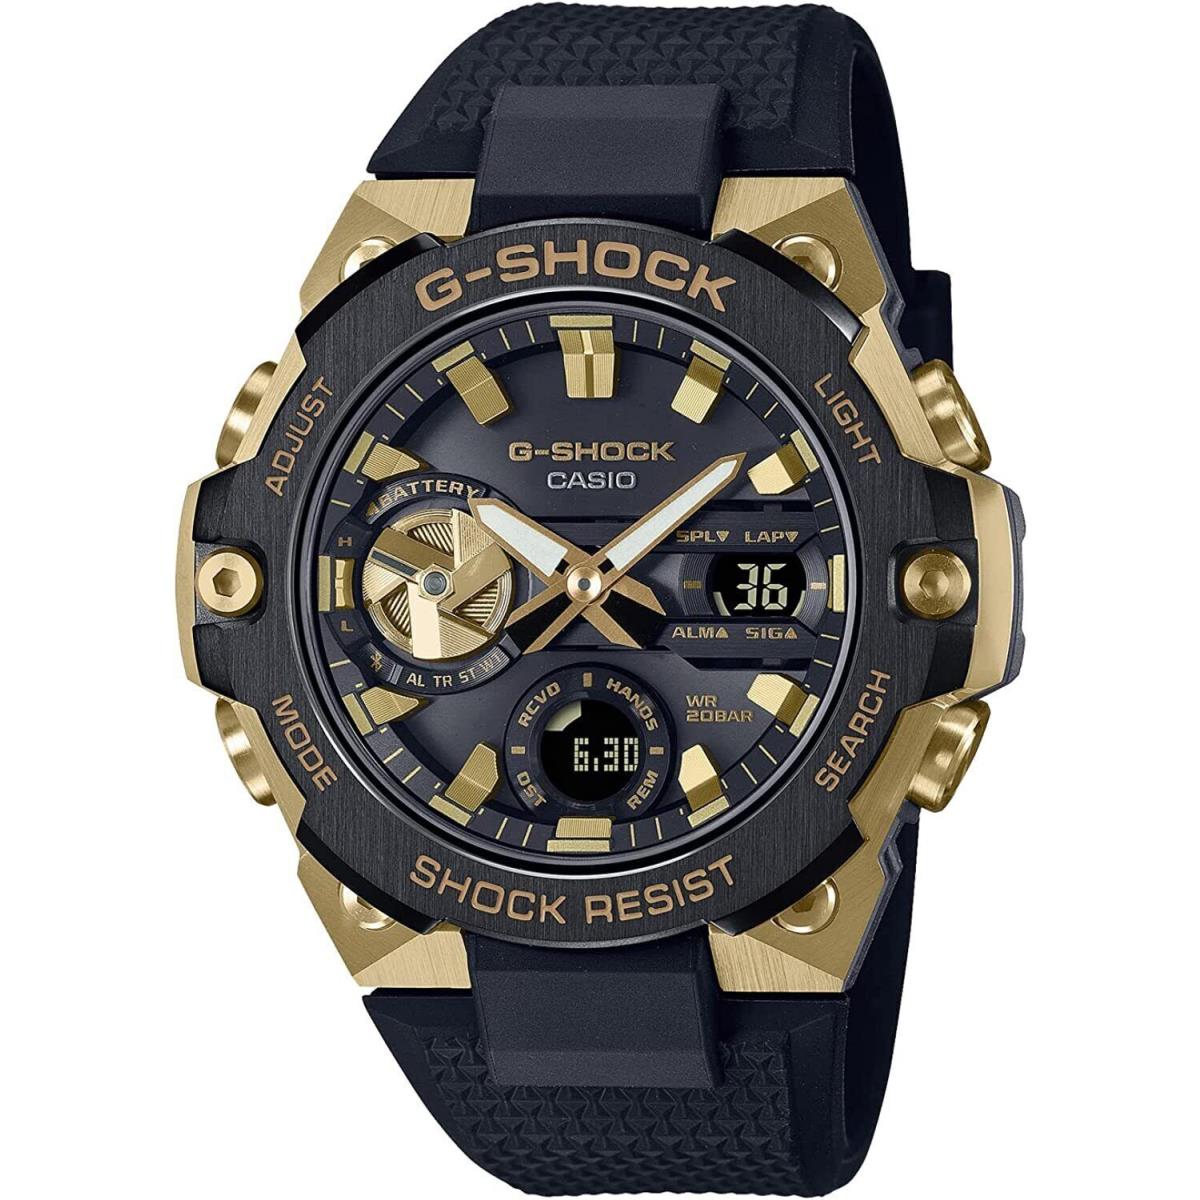 Casio G-shock GSTB400GB-1A9 G-steel Black and Gold Resin Case Black Band